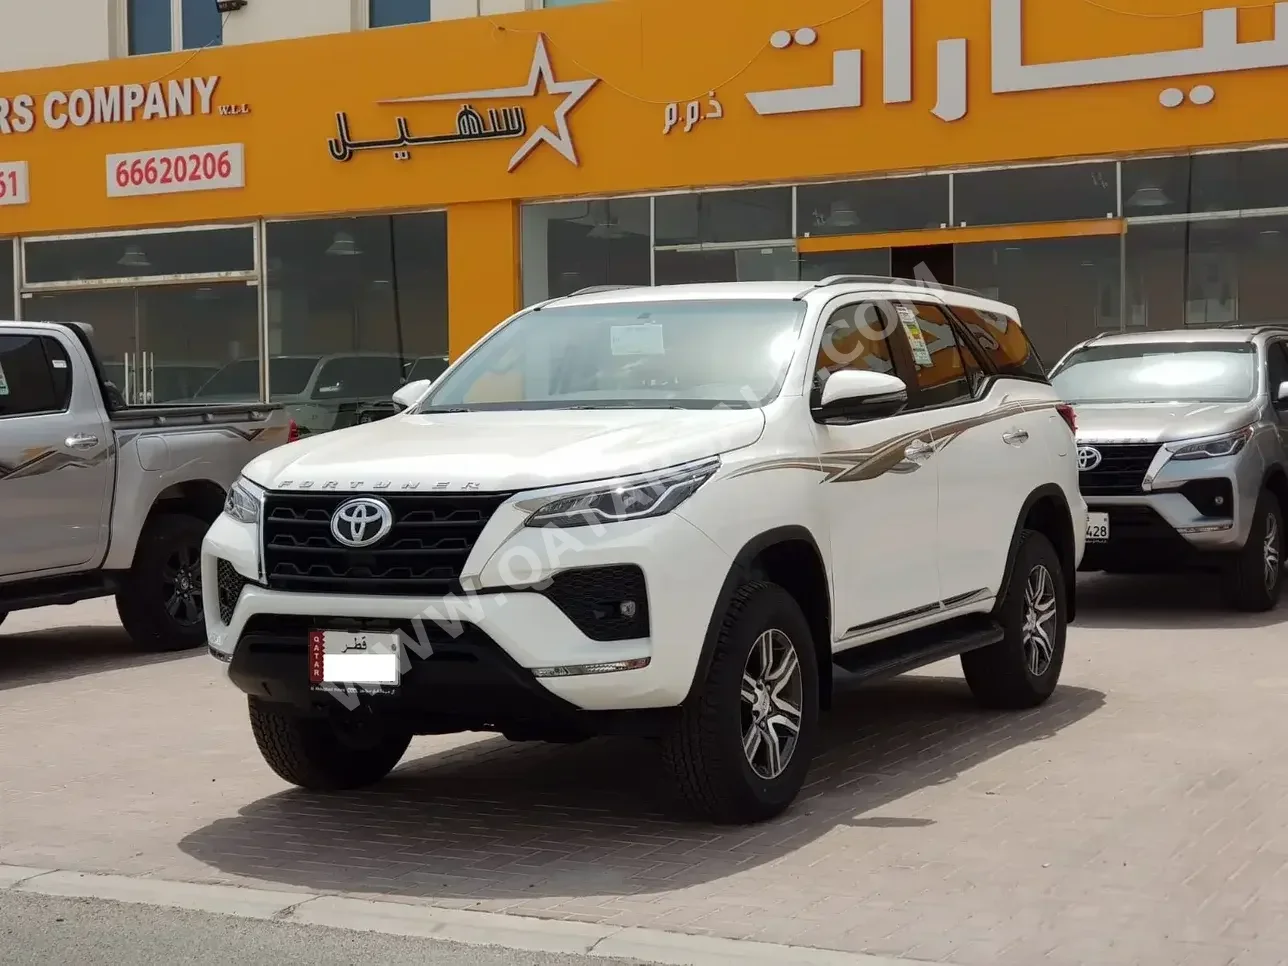 Toyota  Fortuner  SR5  2024  Automatic  0 Km  6 Cylinder  Four Wheel Drive (4WD)  SUV  White  With Warranty